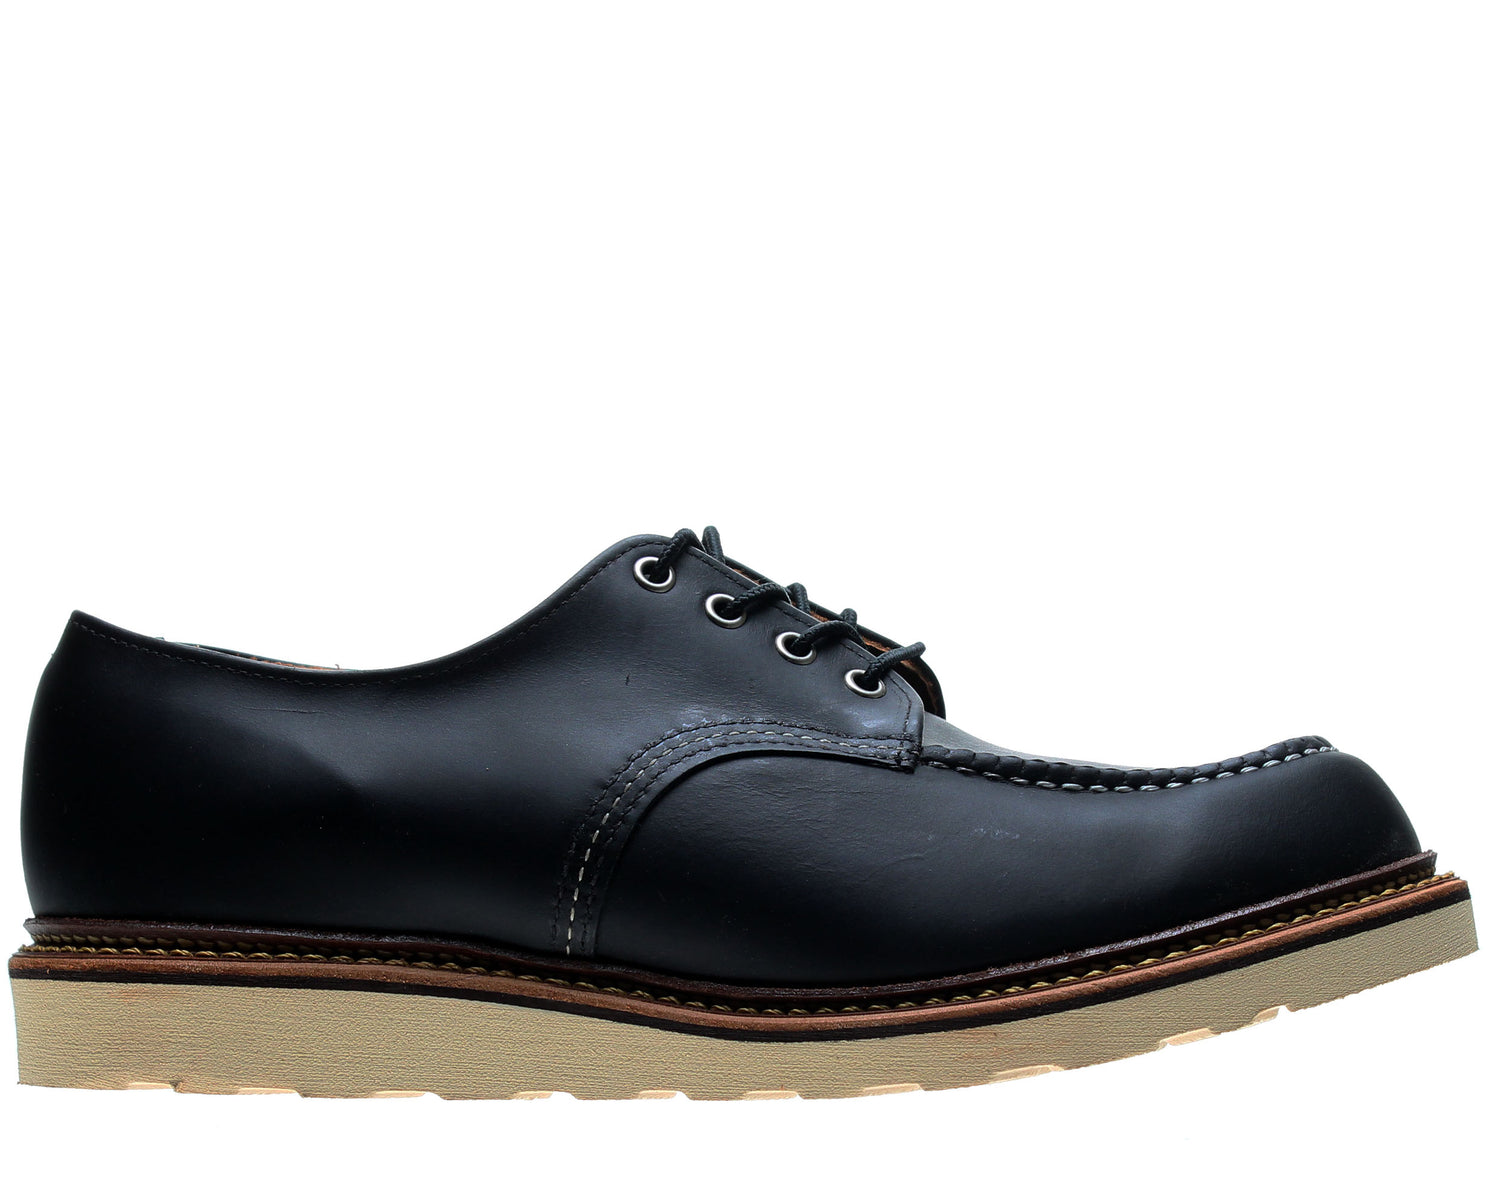 Red Wing Heritage 8106 Classic Oxford Moc Toe Men's Shoes